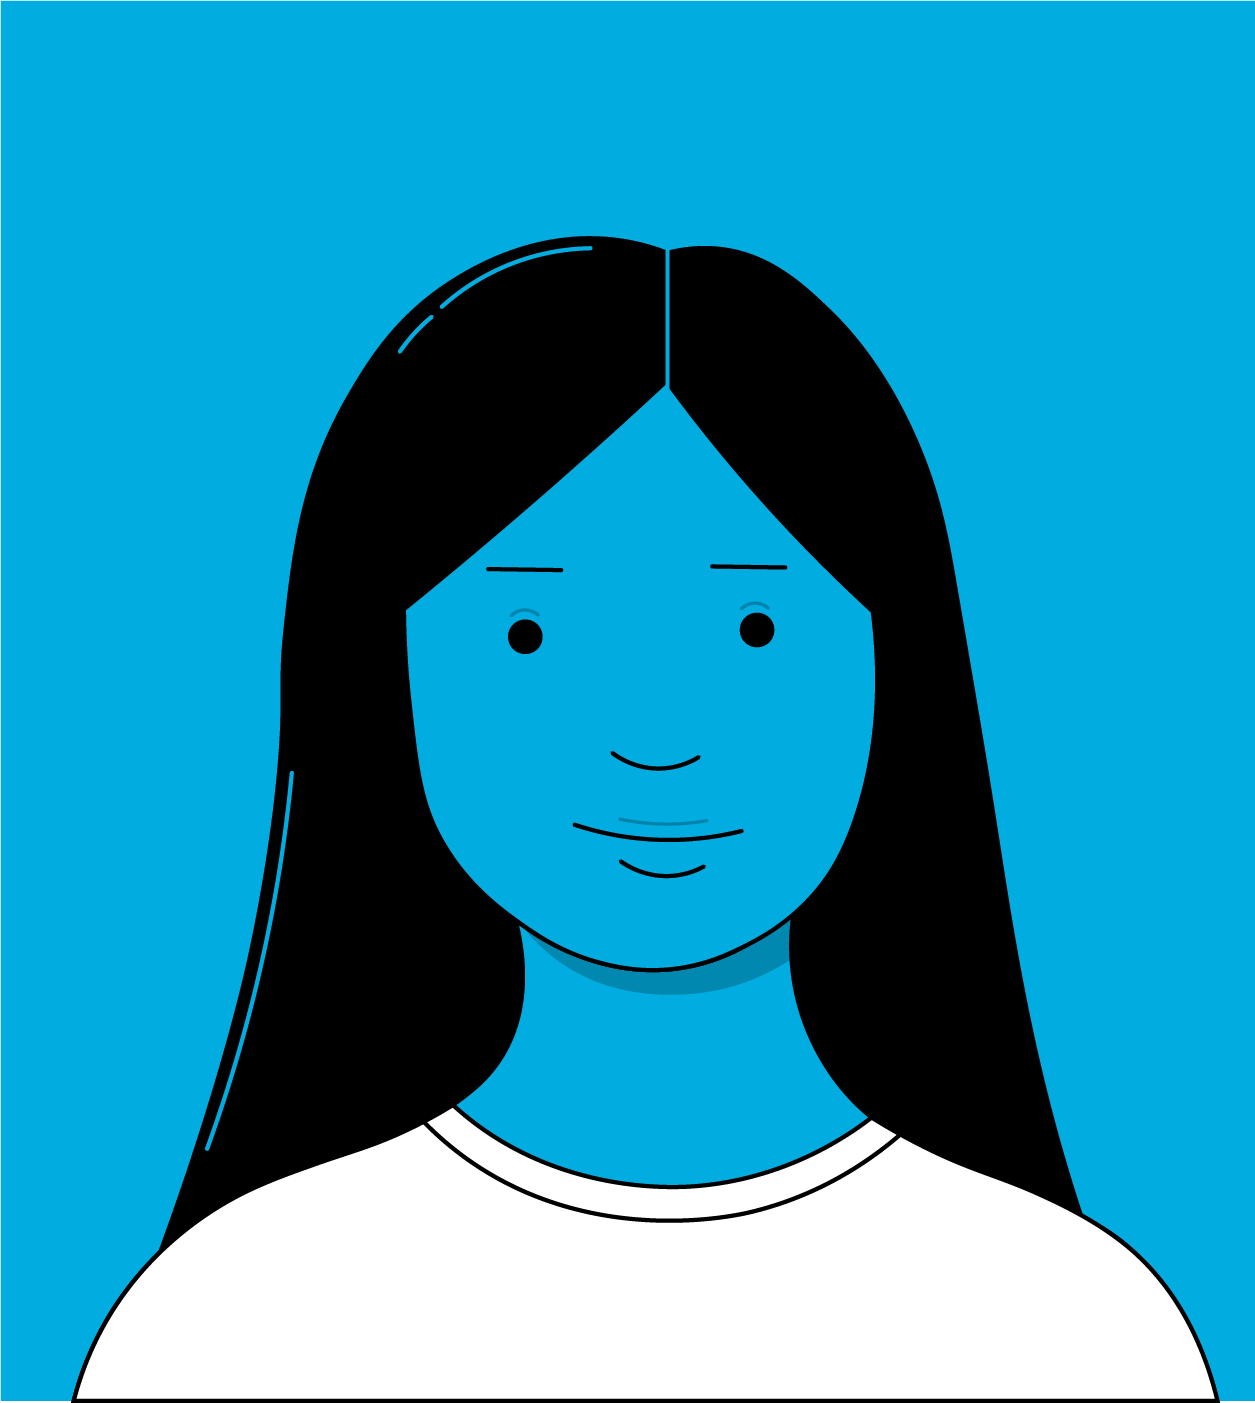 Illustration of headshot of a smiling woman wearing a white tee